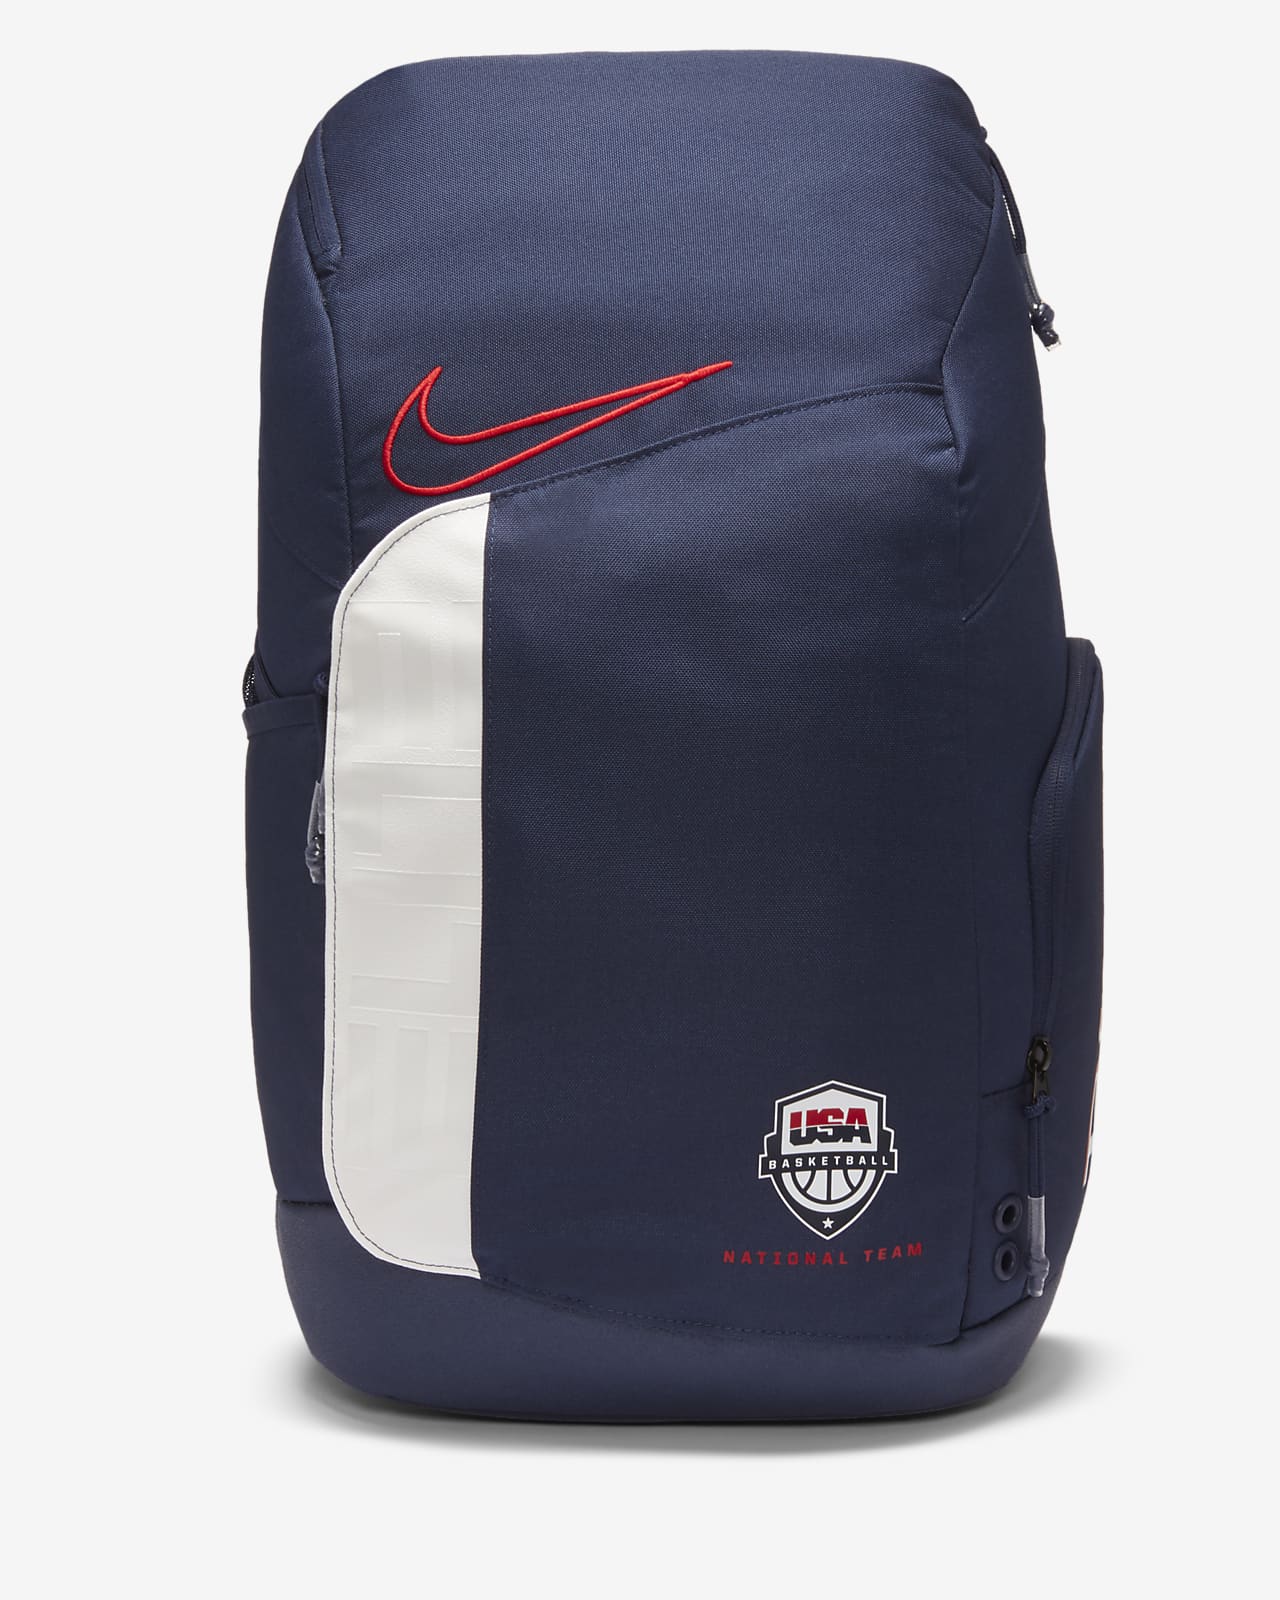 Nike Classic Backpack (Sky Blue/White) : Amazon.in: Bags, Wallets and  Luggage